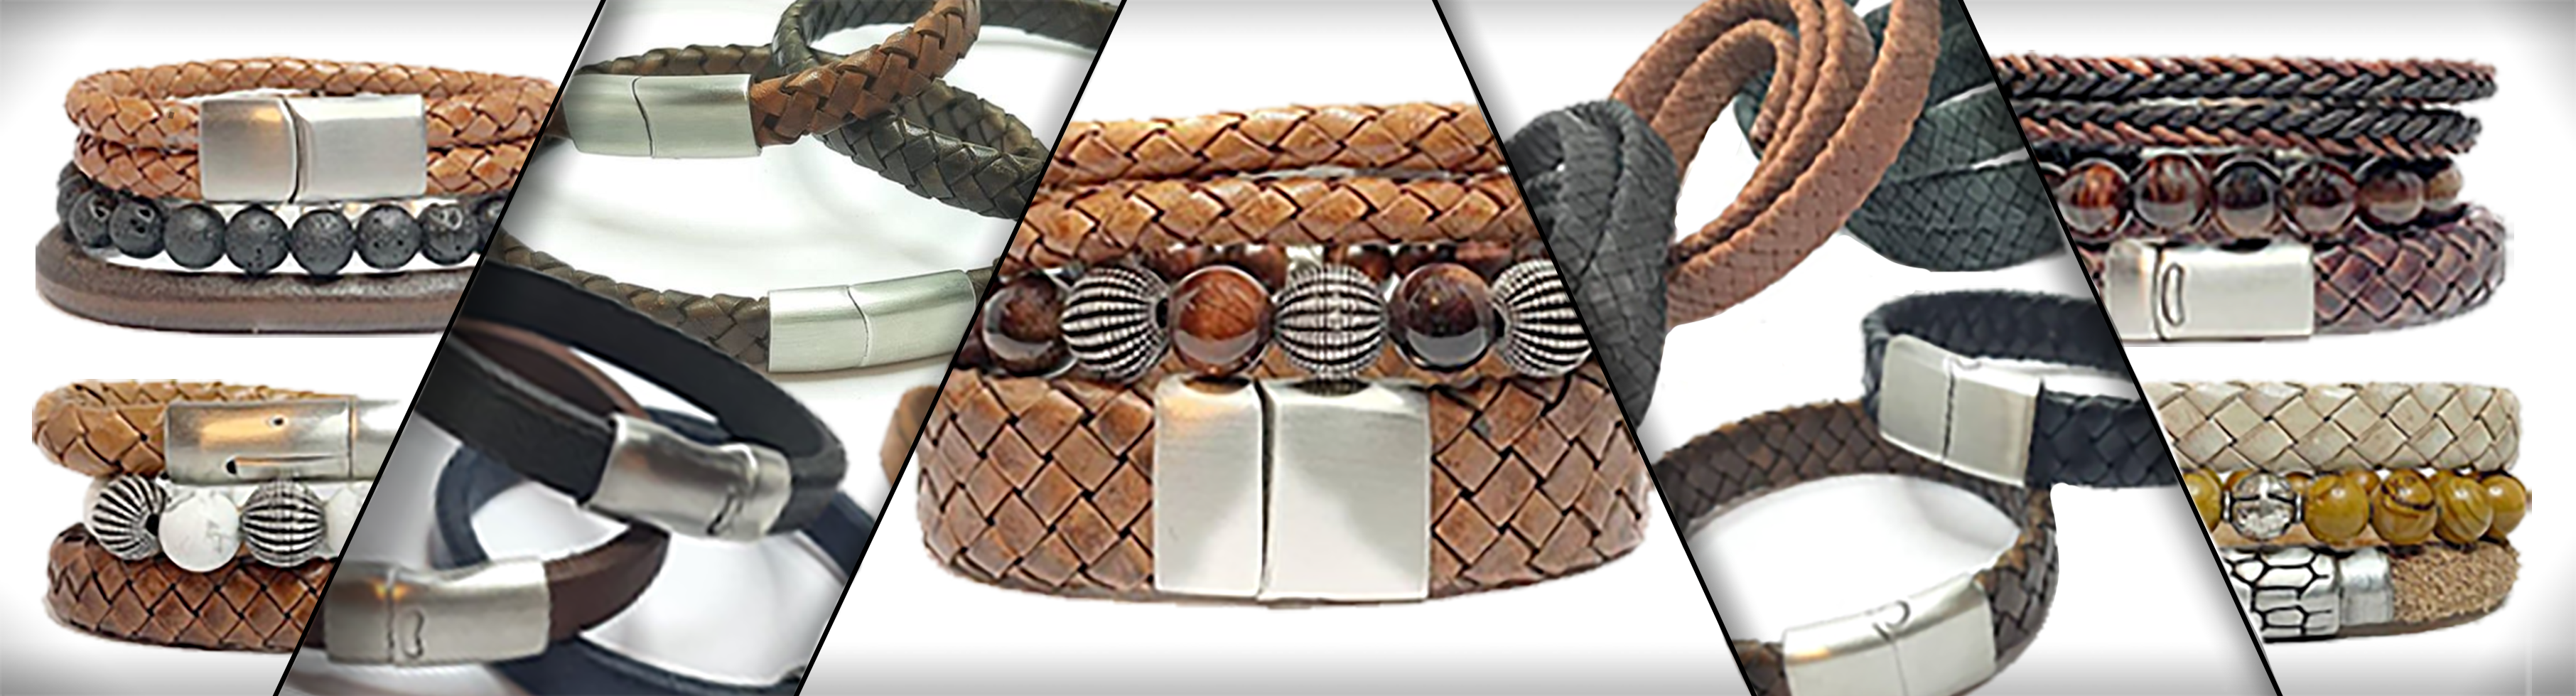 Buy Leather Cord Braided Leather Oval Regaliz Oval Regaliz Braided 11mm by 6mm  at wholesale prices